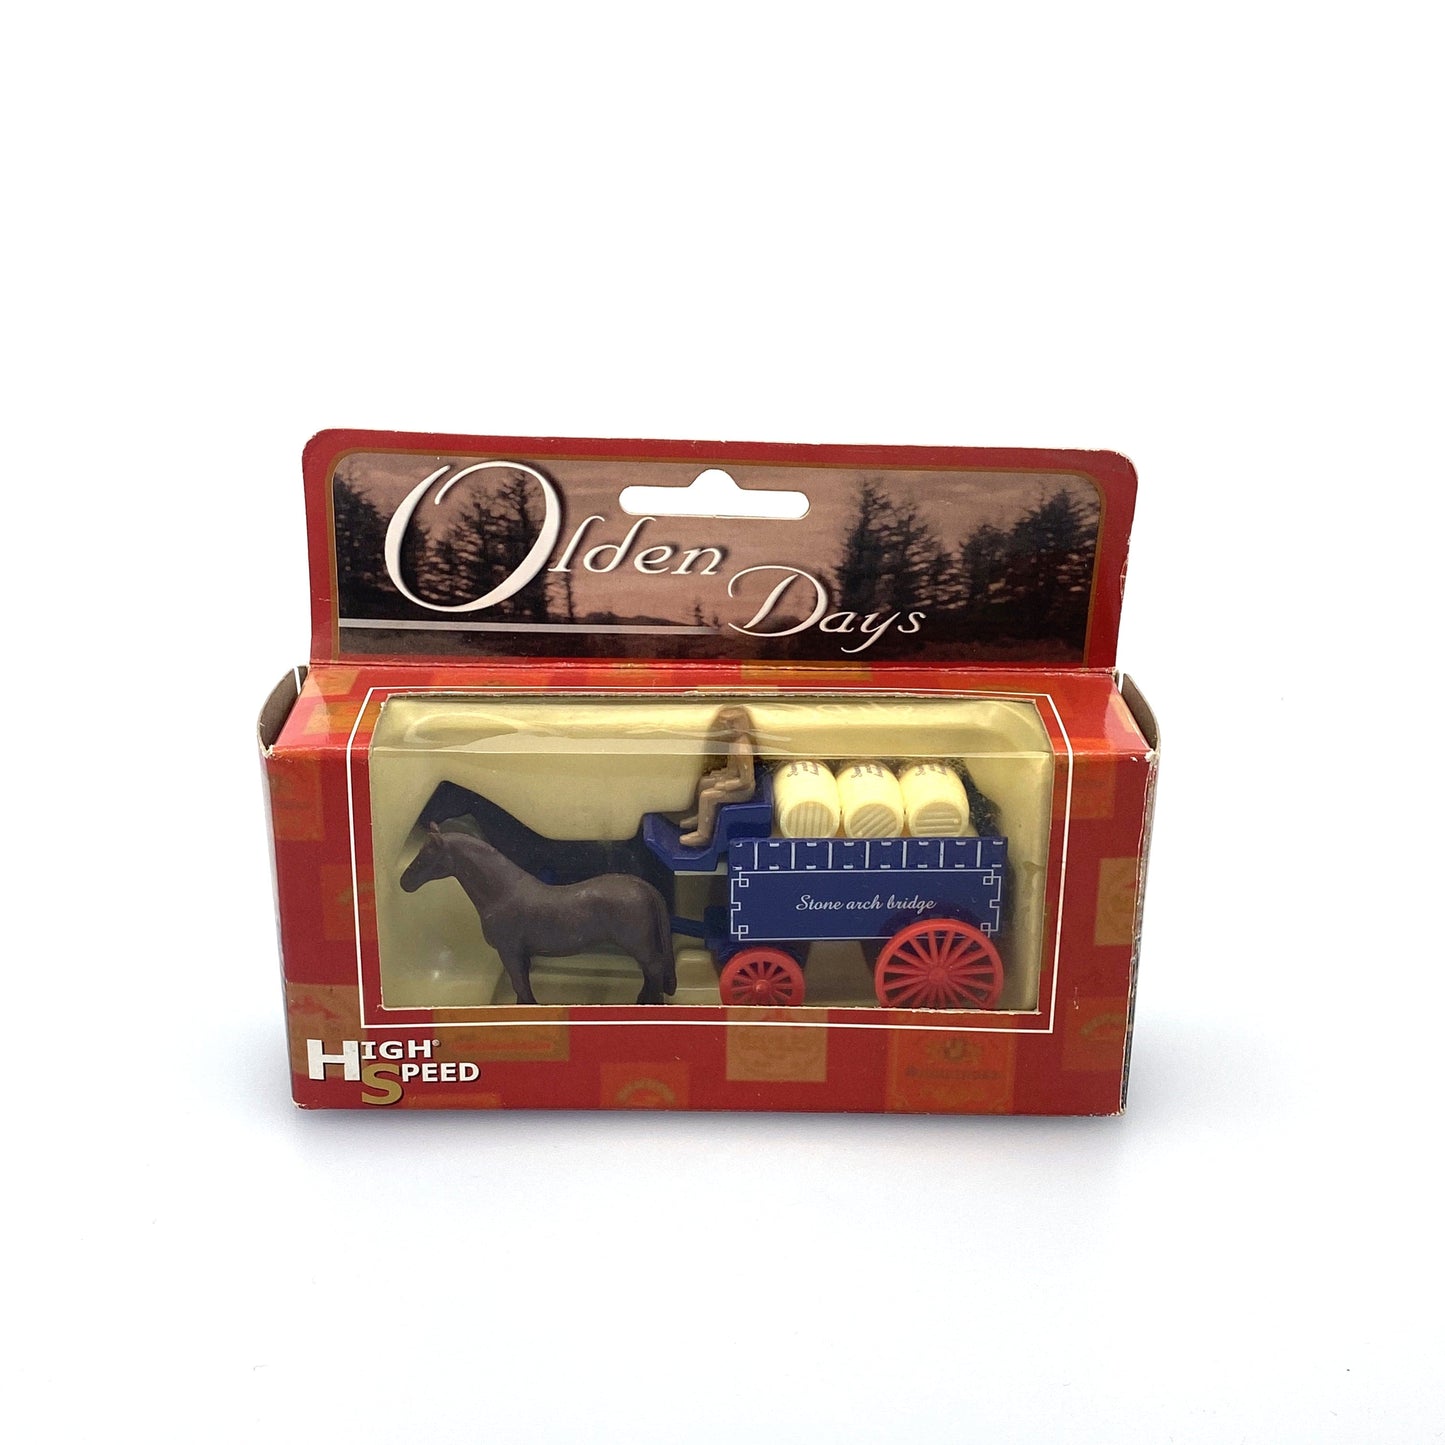 Vintage Olden Days “Stone arch bridge” Horse-Drawn Beer Delivery Wagon | Diecast Toy Vehicle